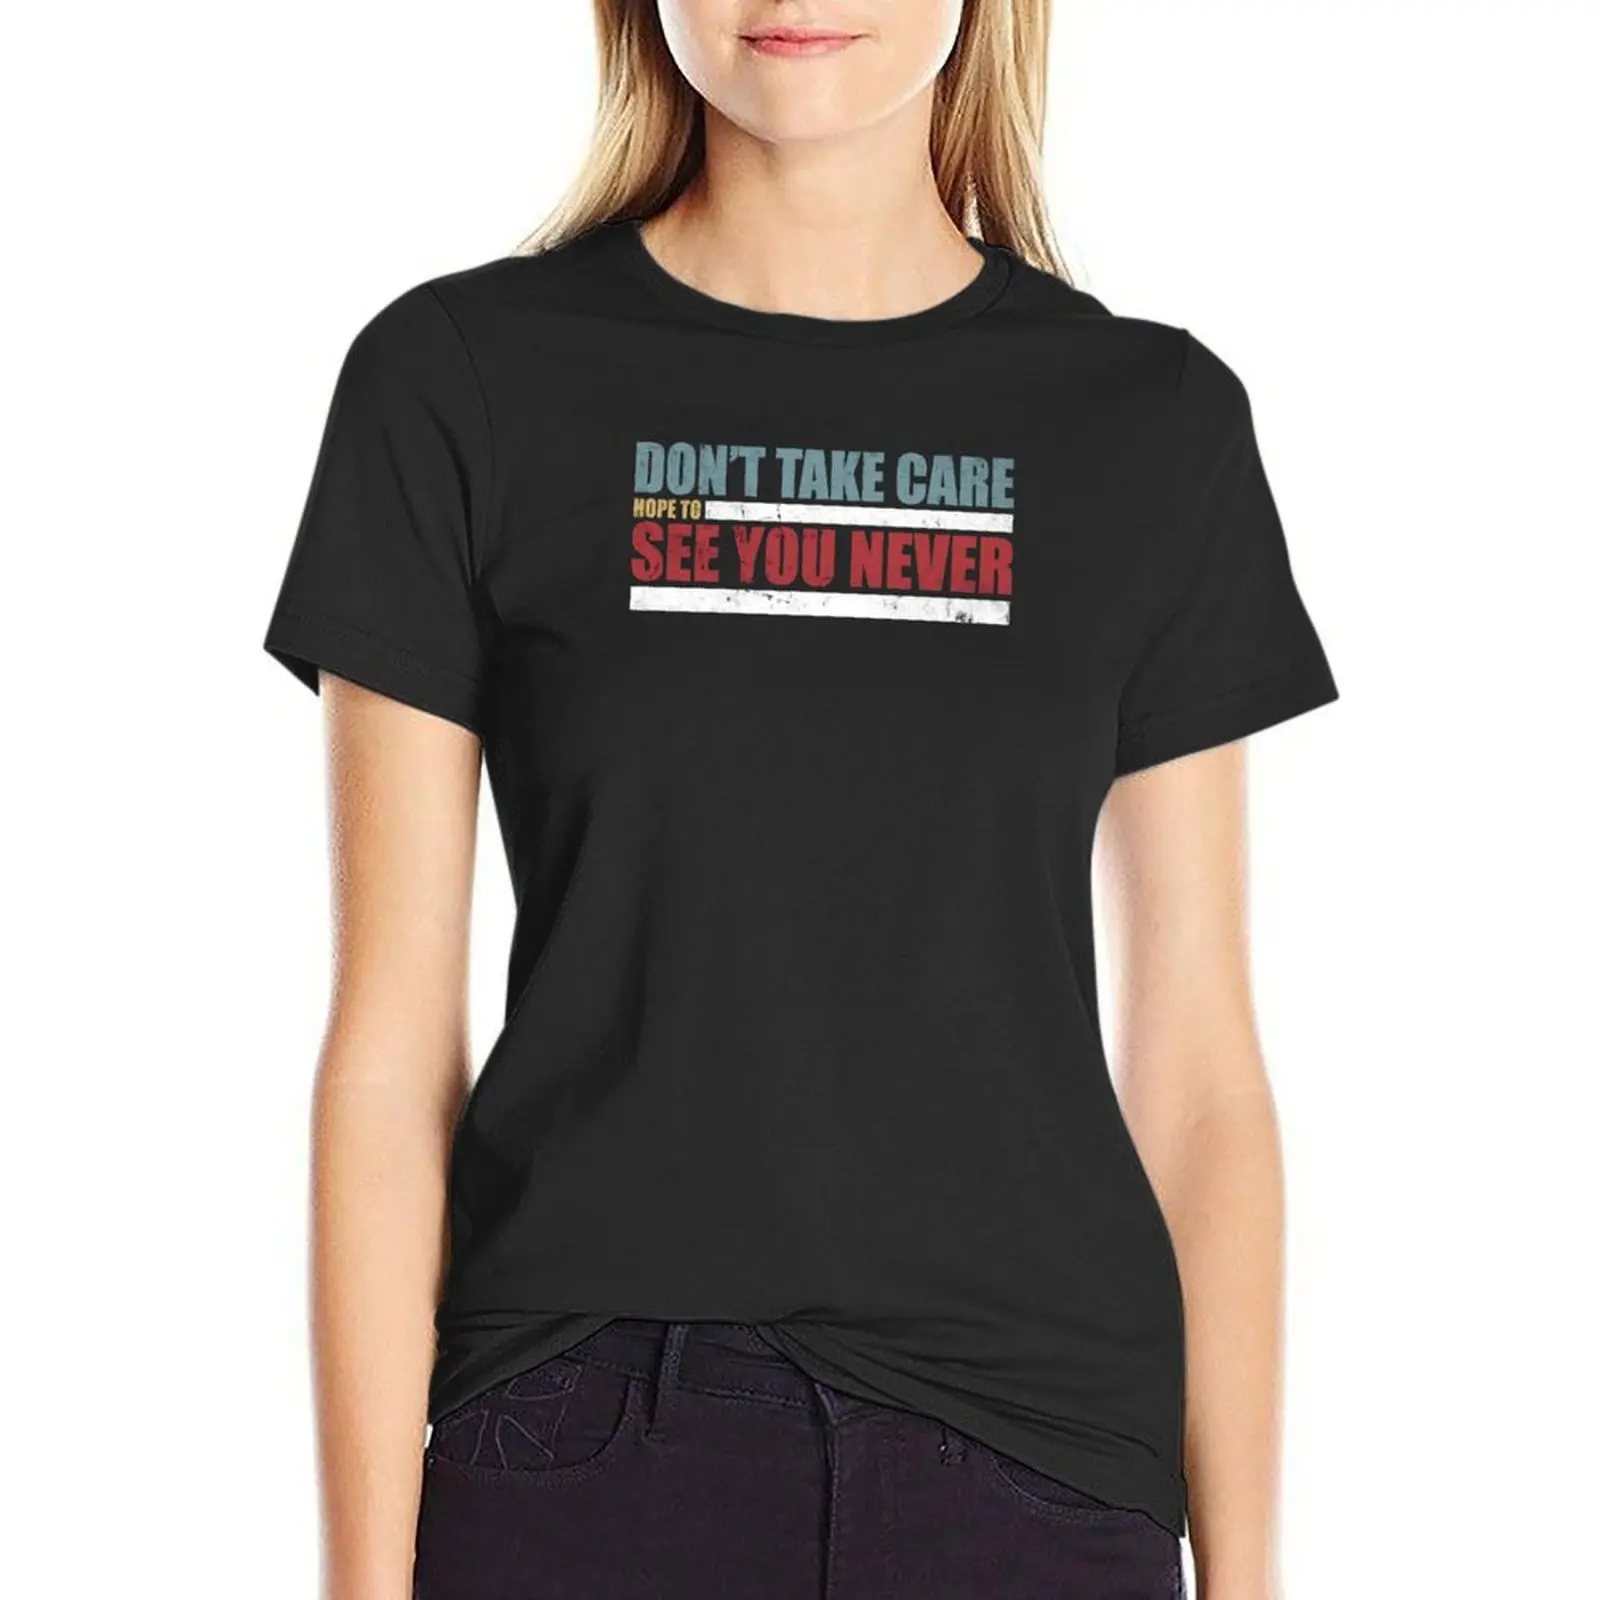 

MTV The Challenge- Don't Take Care, Hope to See you Never T-shirt aesthetic clothes summer tops t shirt dress Women